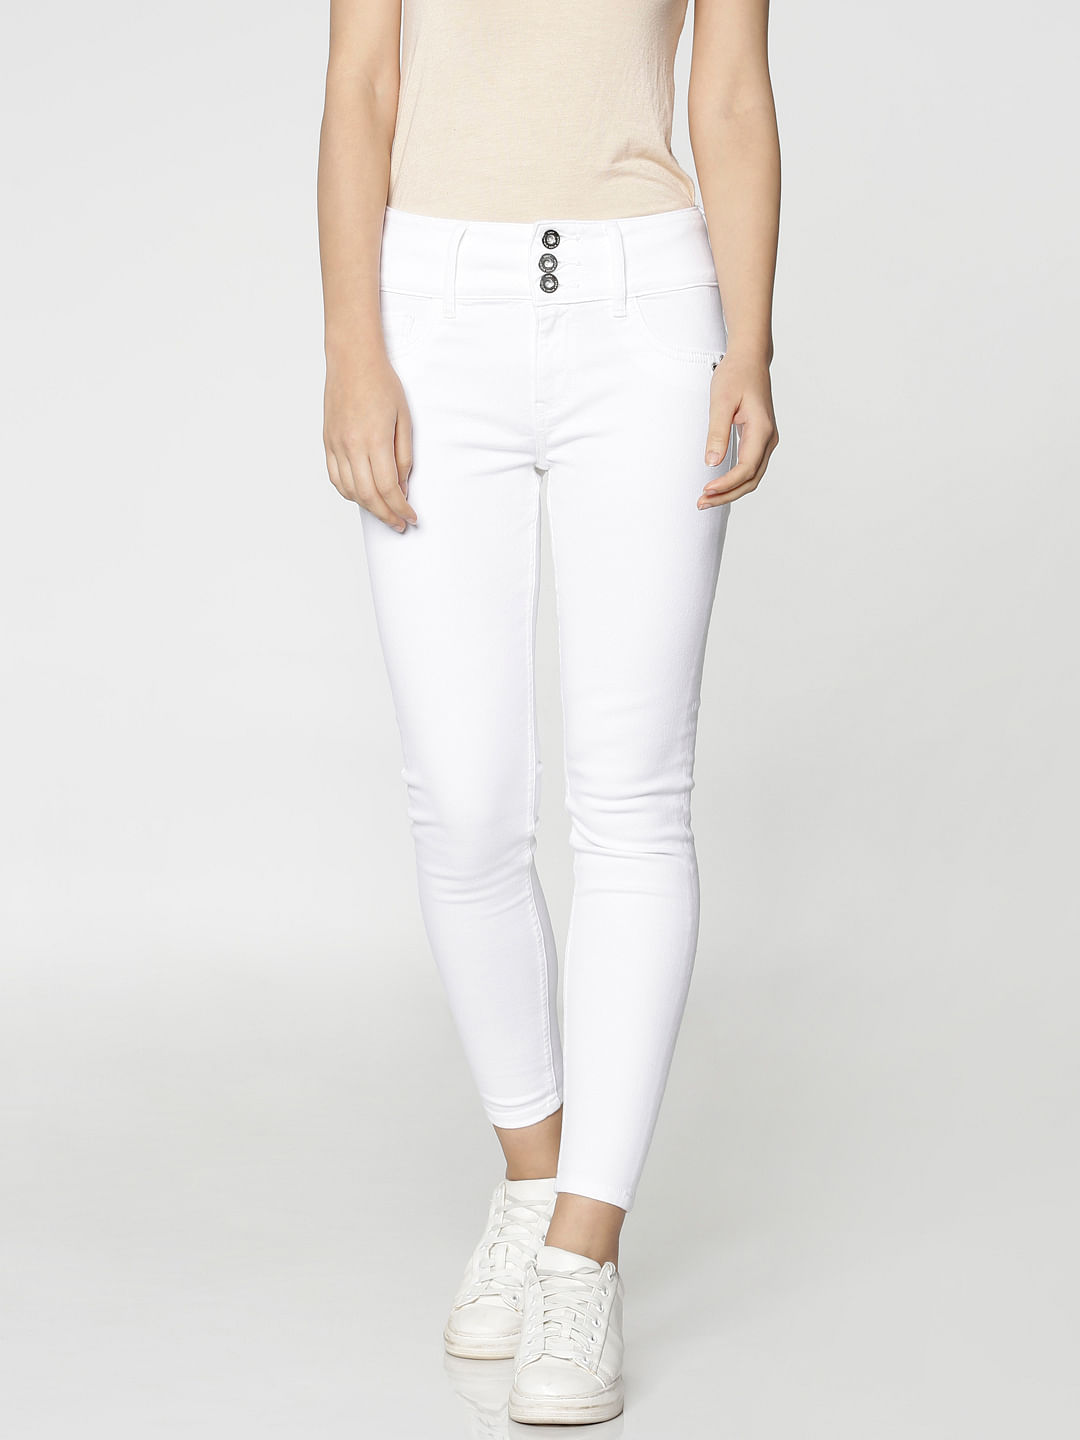 white ankle length jeans